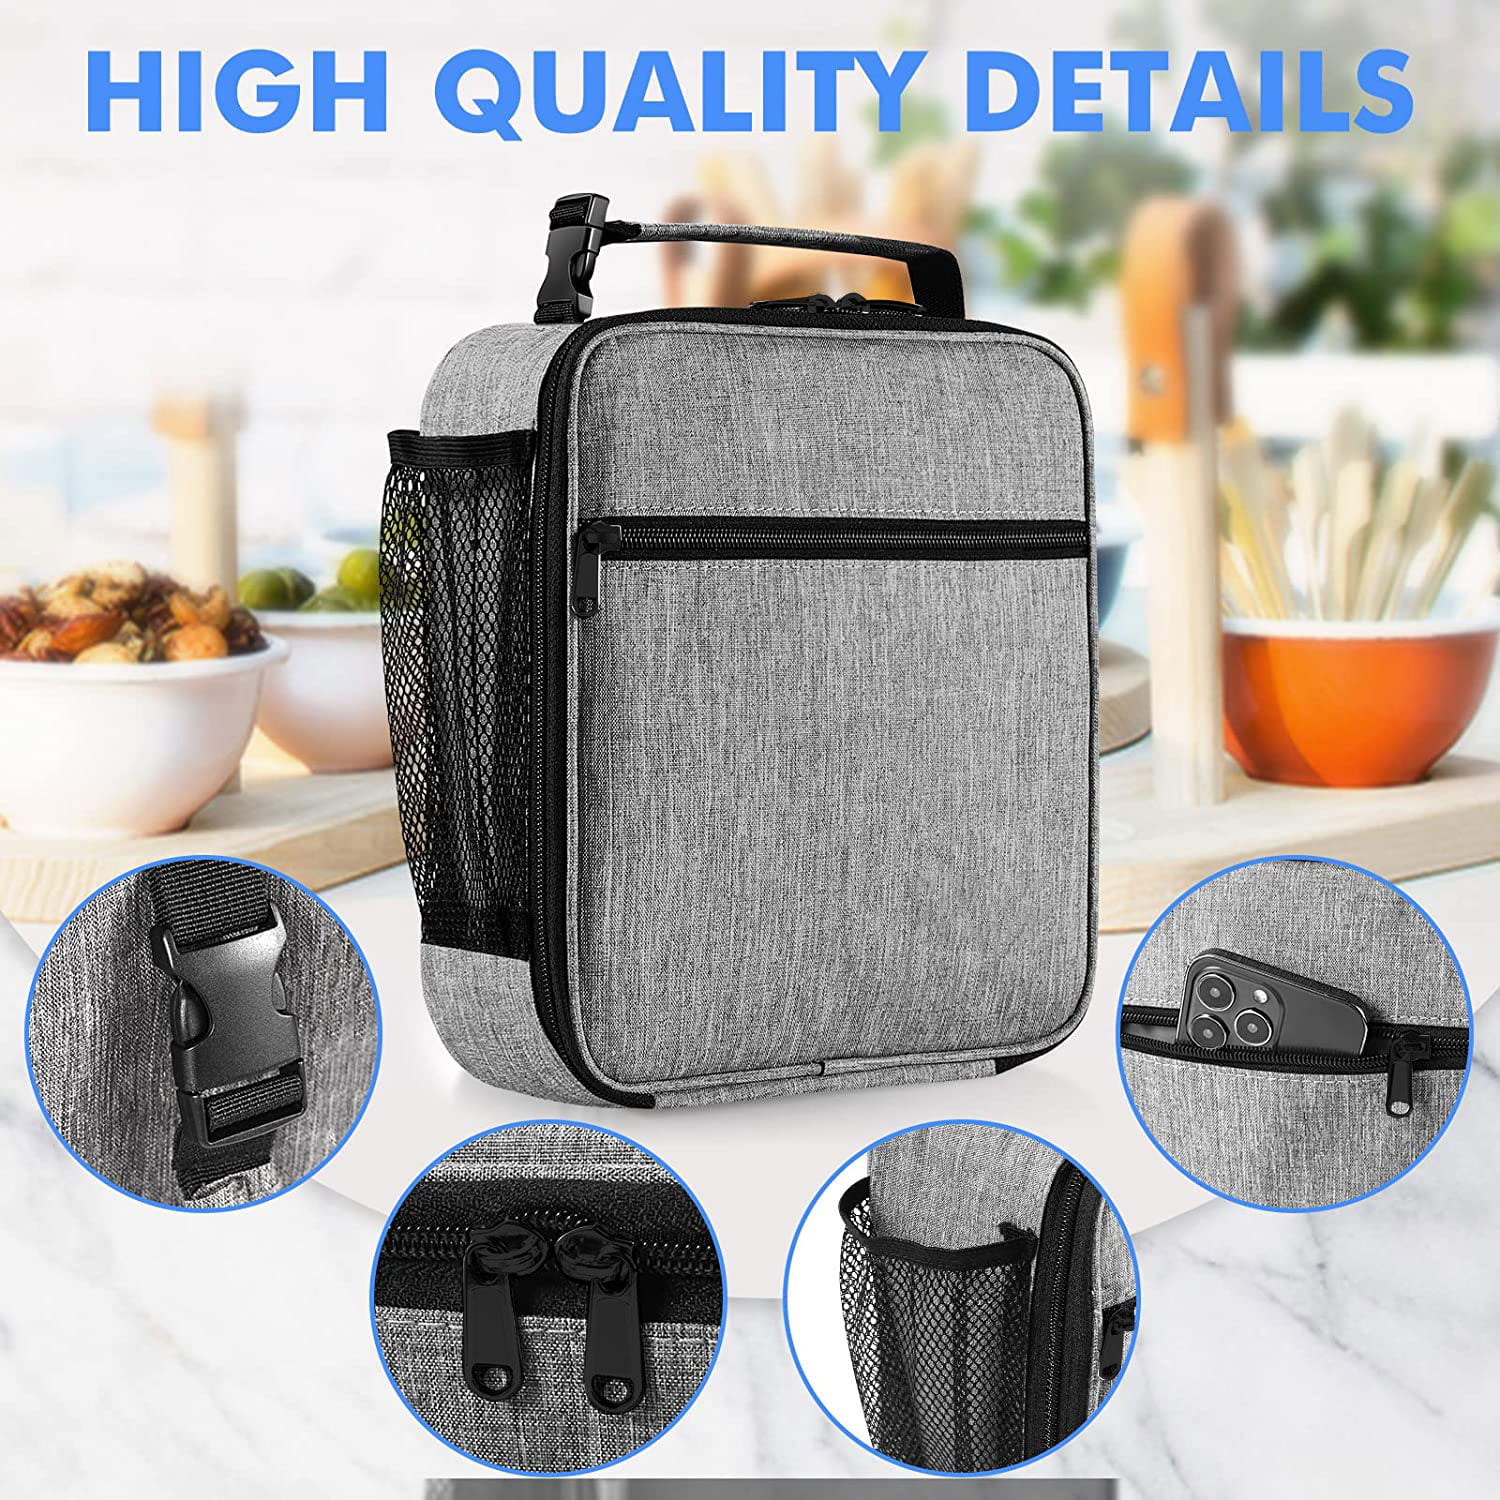  Lucky Lunch Cooler Bag, Insulated Lunch Box for Women, Small  Cooler Lunch Bag for Men, Portable Cooler, Leakproof Beach & Picnic Cooler,  with Shoulder Strap : Sports & Outdoors